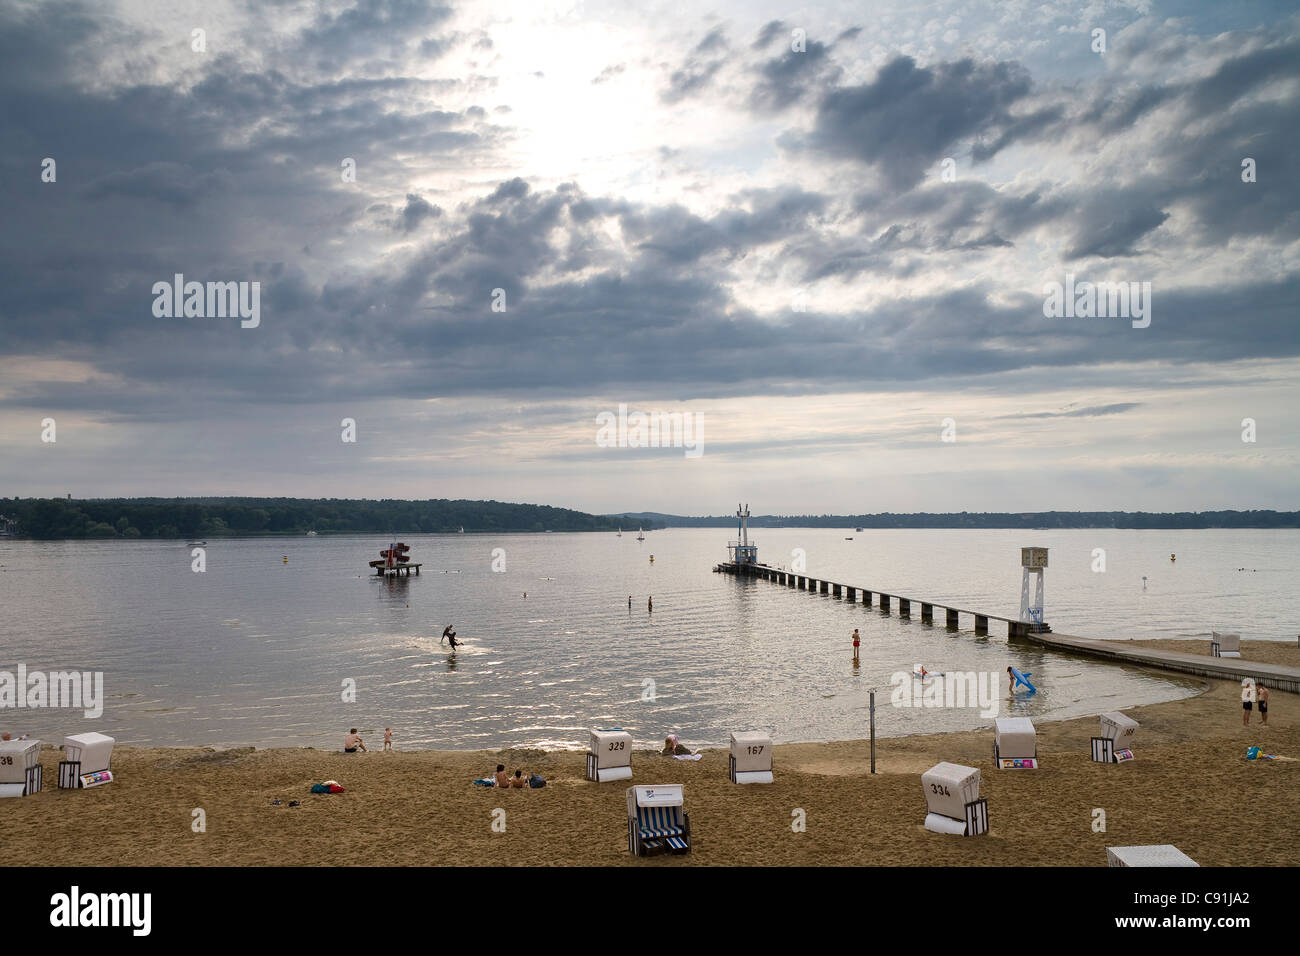 Wannsee lido under clouded sky, Berlin, Germany, Europe Stock Photo